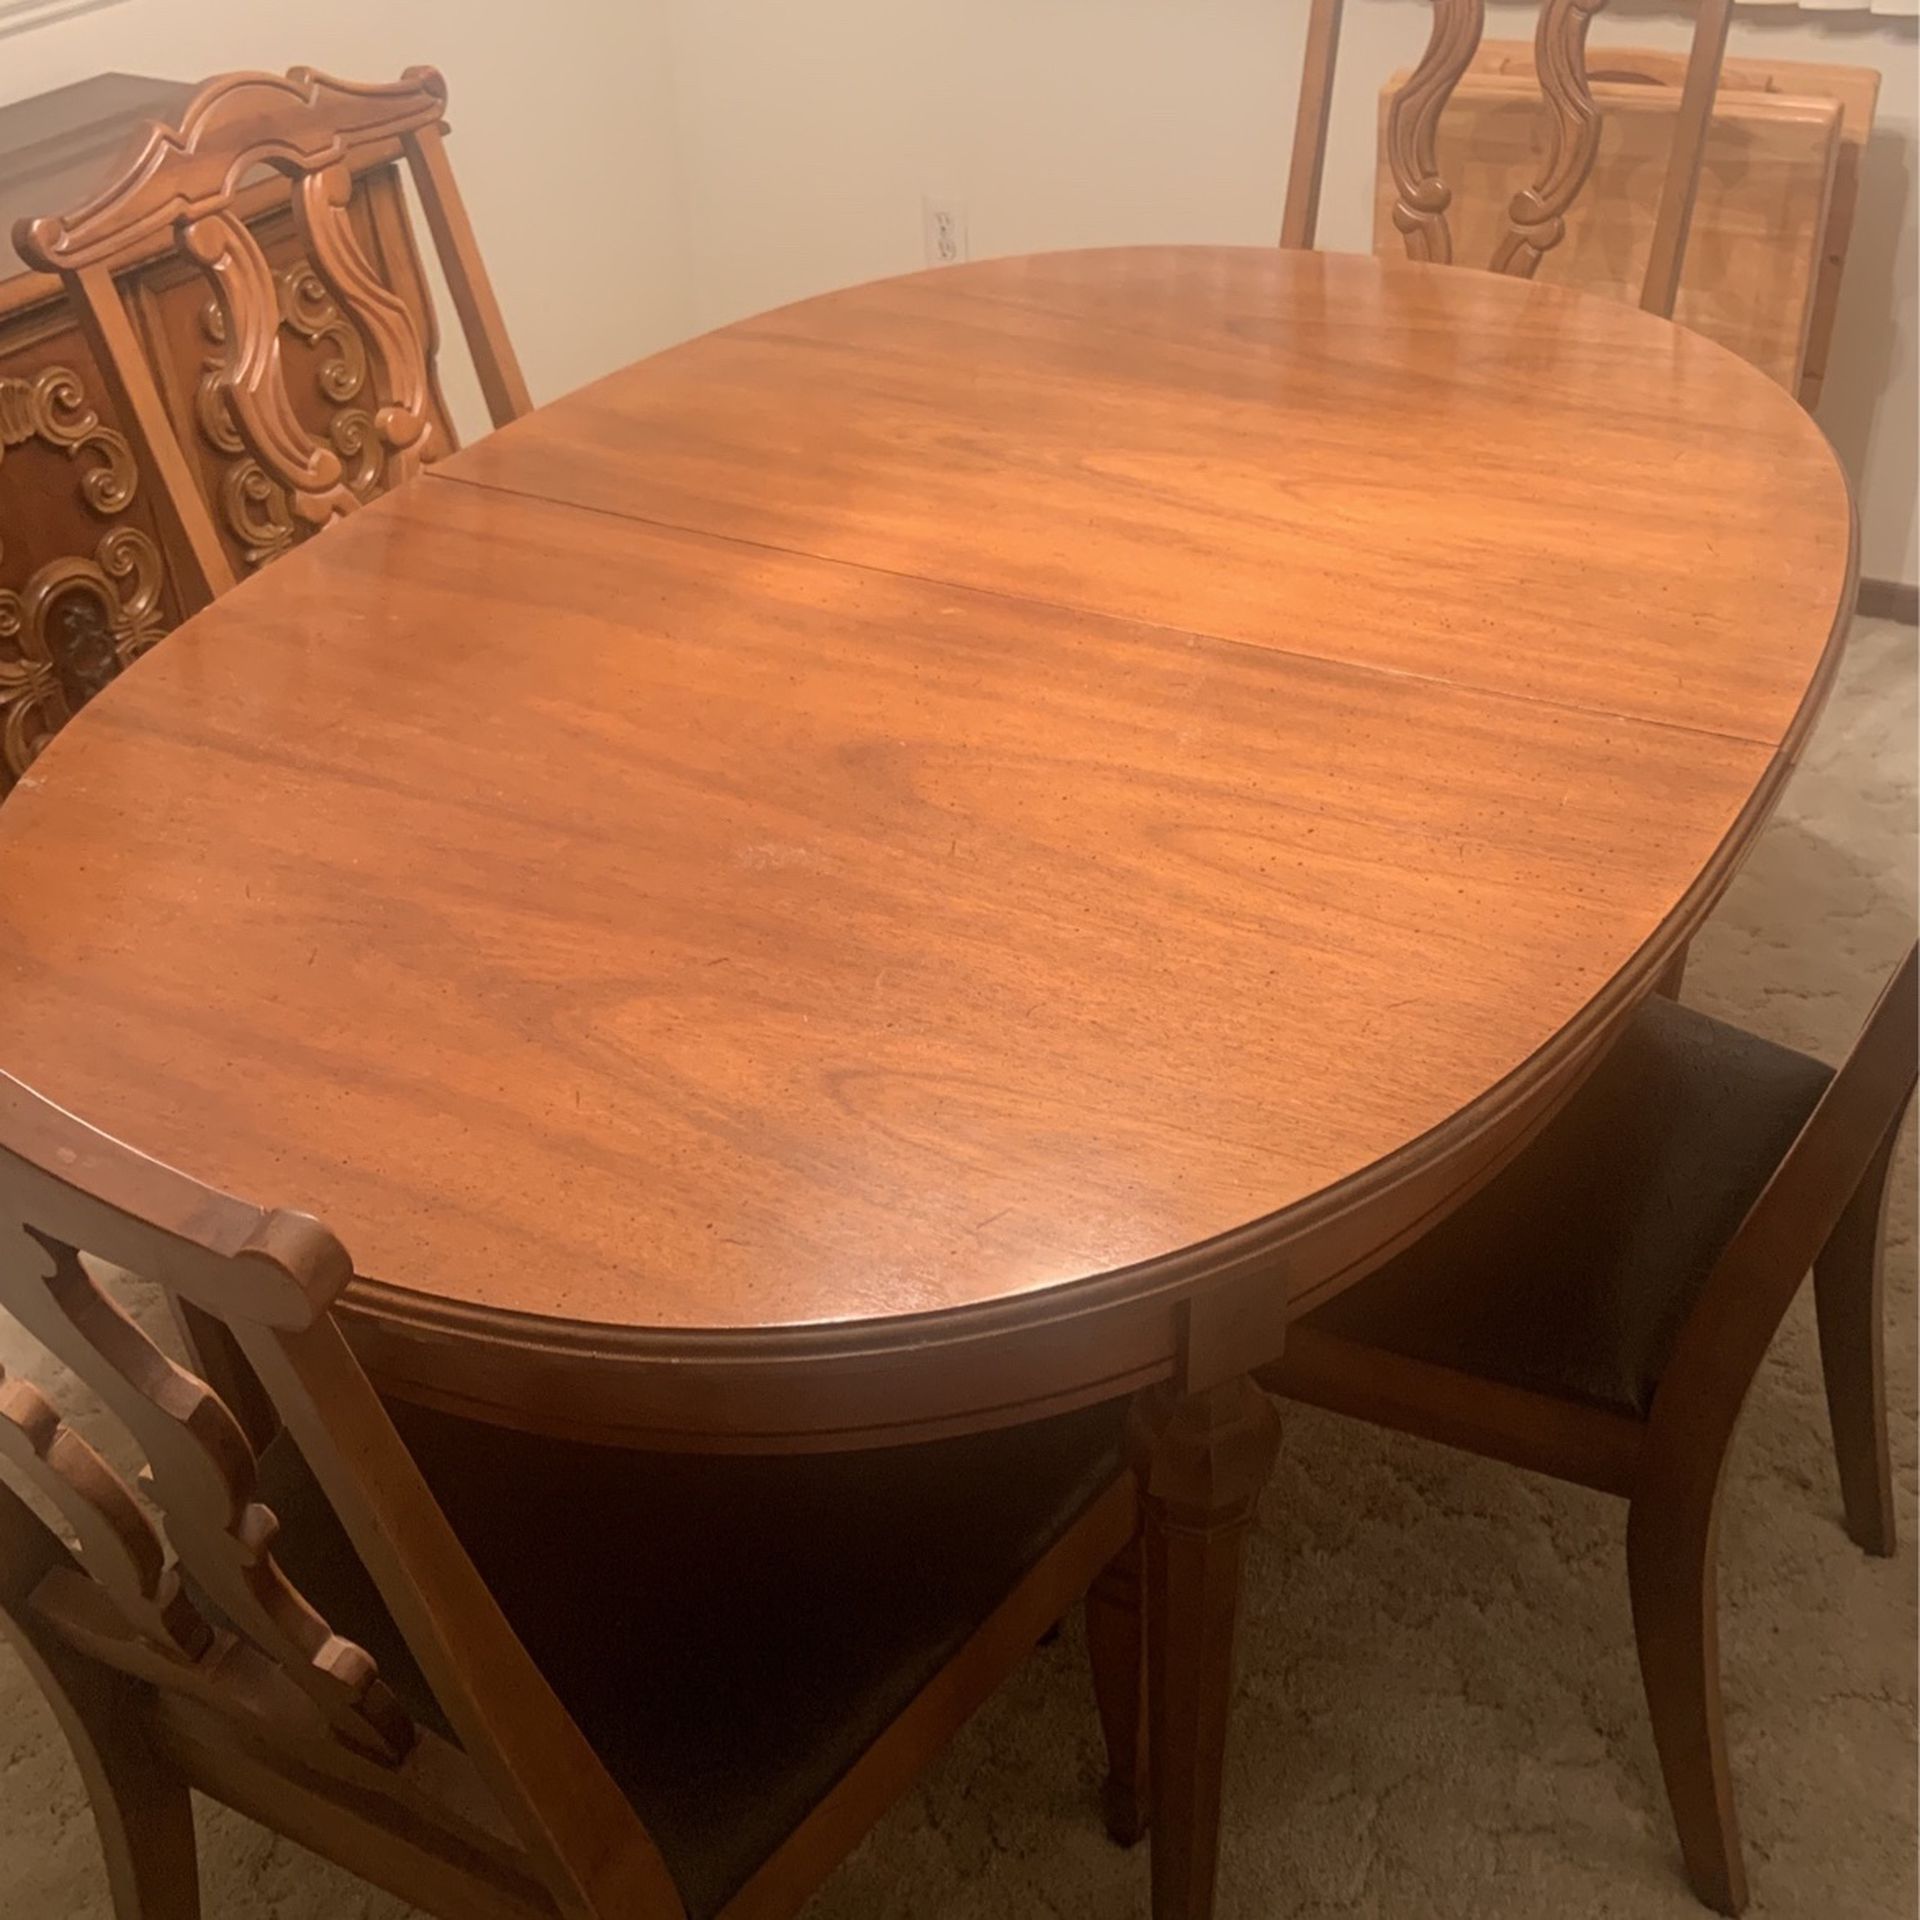 Vintage eight piece dining room set in excellent condition